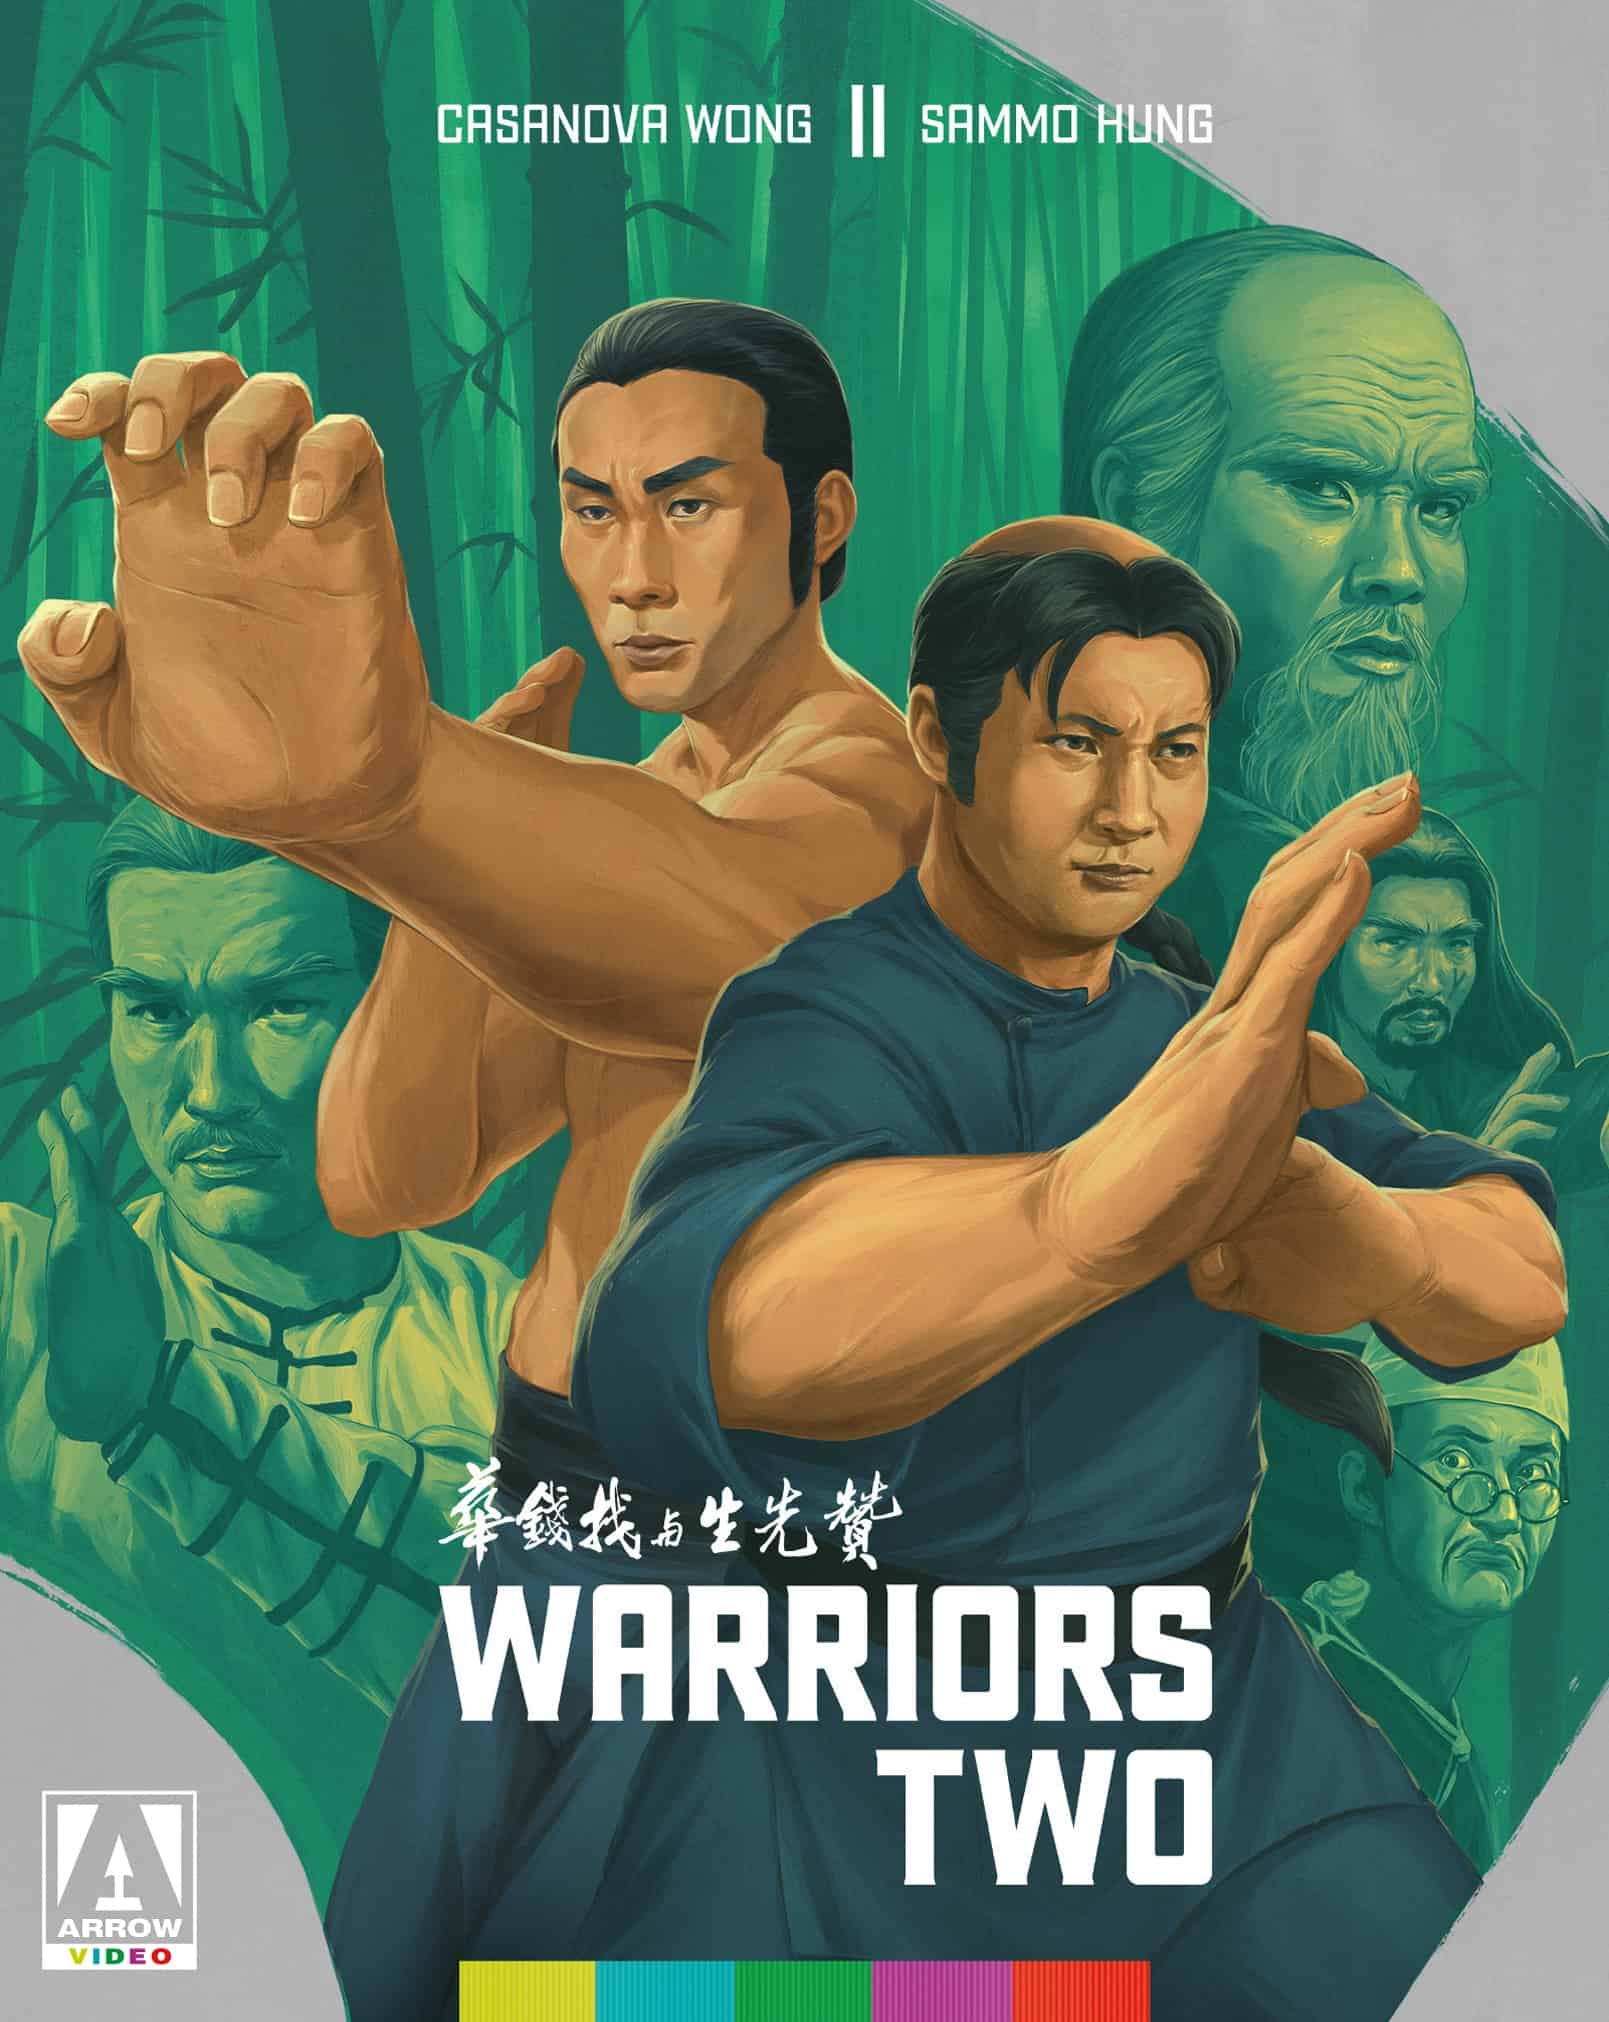 Arrow Video's June Releases: Martial Arts, Comedy, and Post-Apocalyptic Cinema in Limited Edition Glory 19